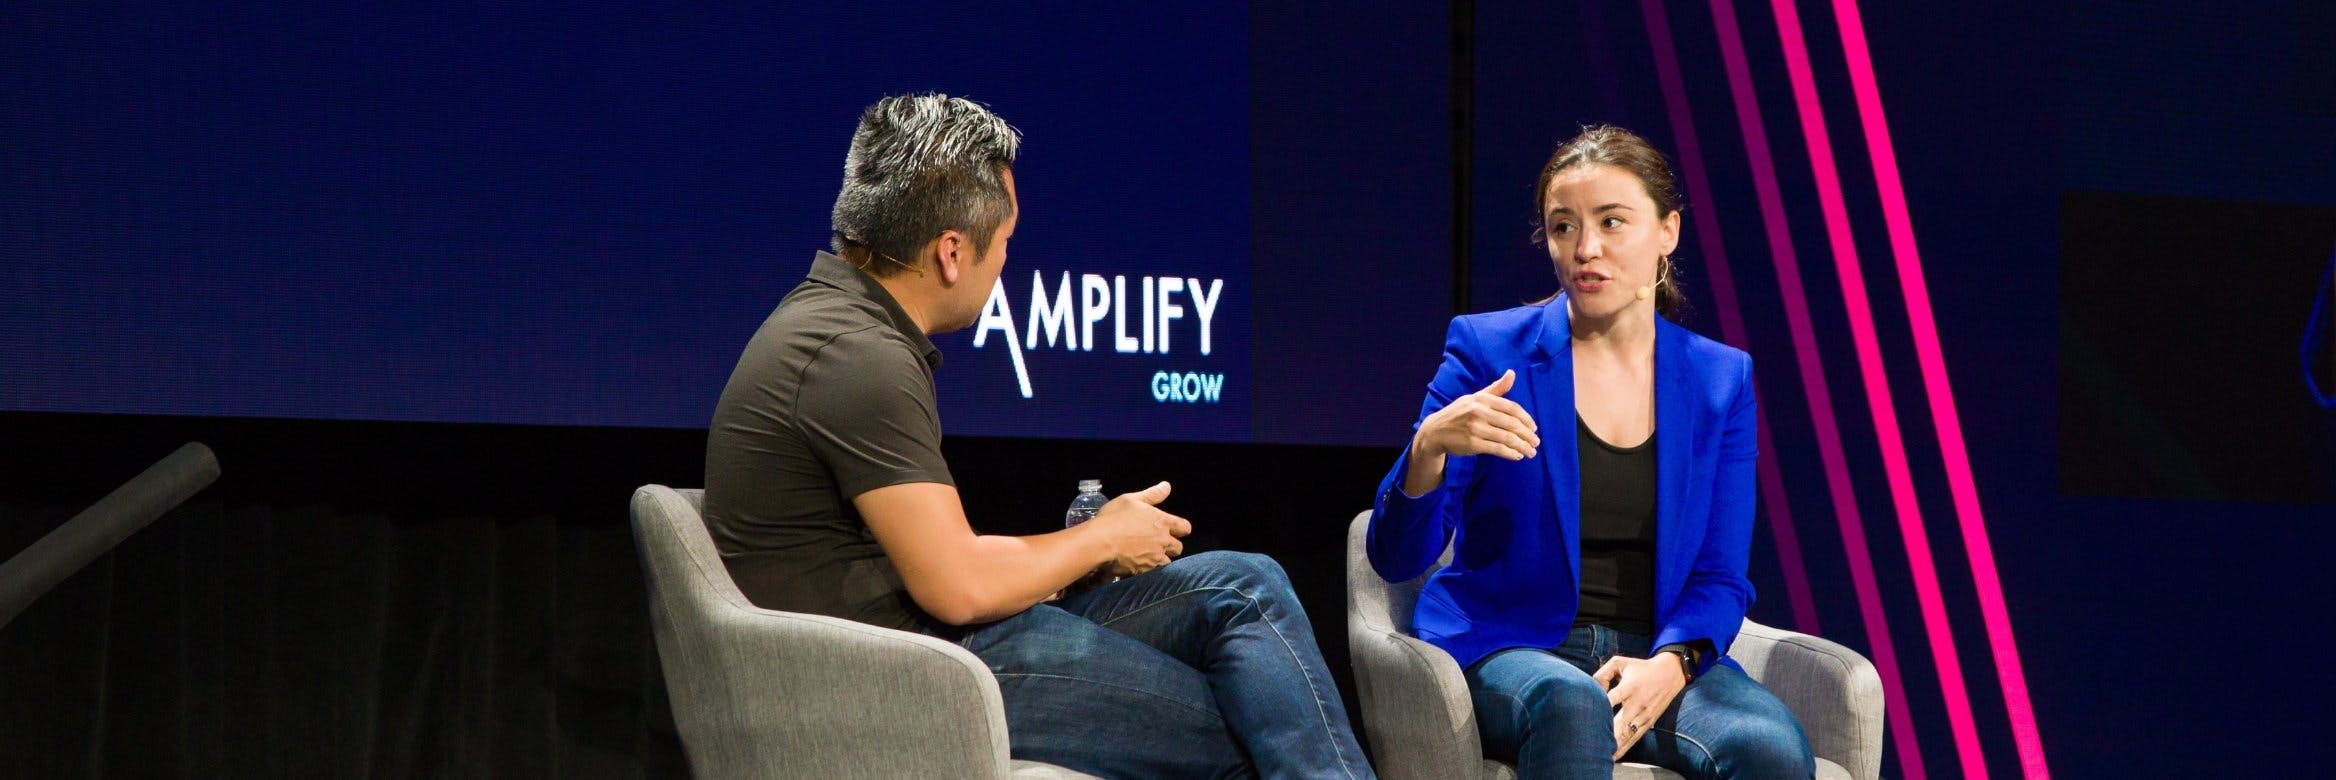 Why You Should Attend our Product Conference, Amplify 2019